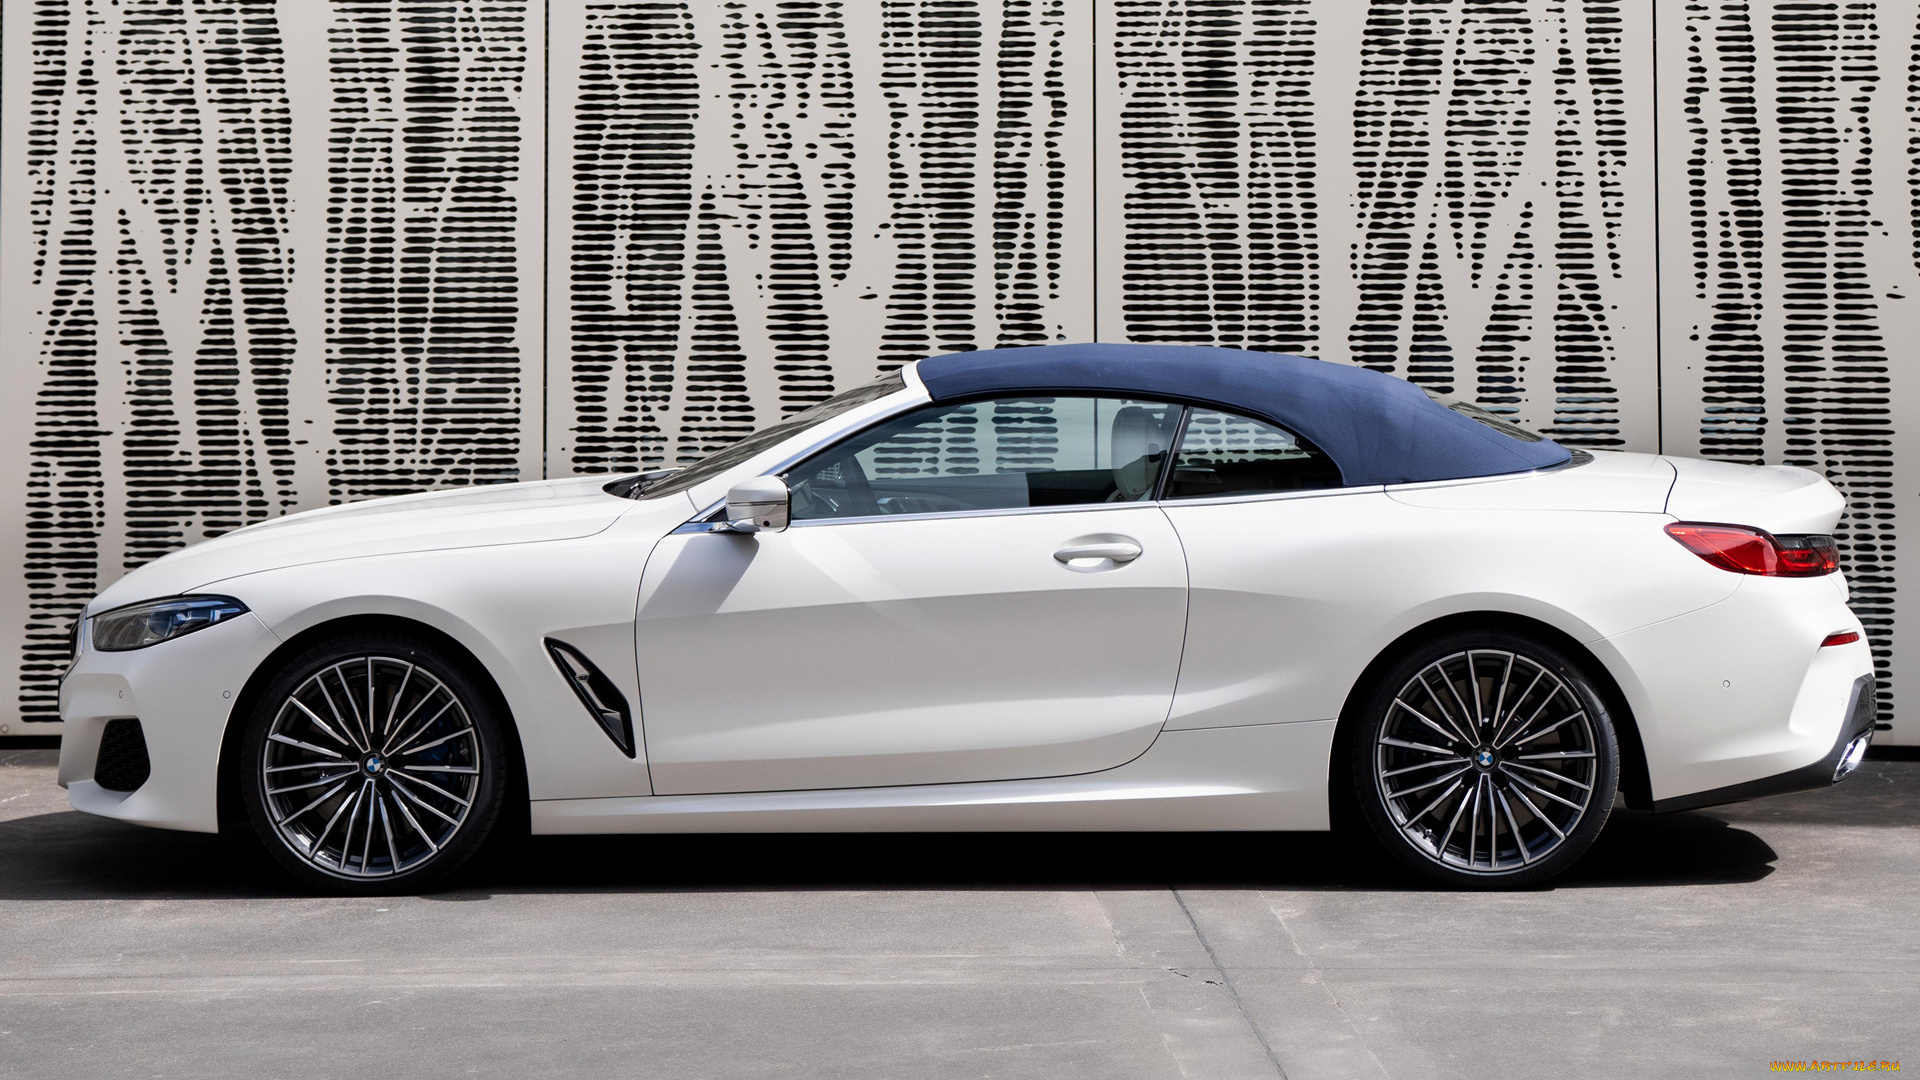 bmw, 8, series, convertible, haute, couture, edition, 2021, автомобили, bmw, 8, series, convertible, haute, couture, edition, 2021